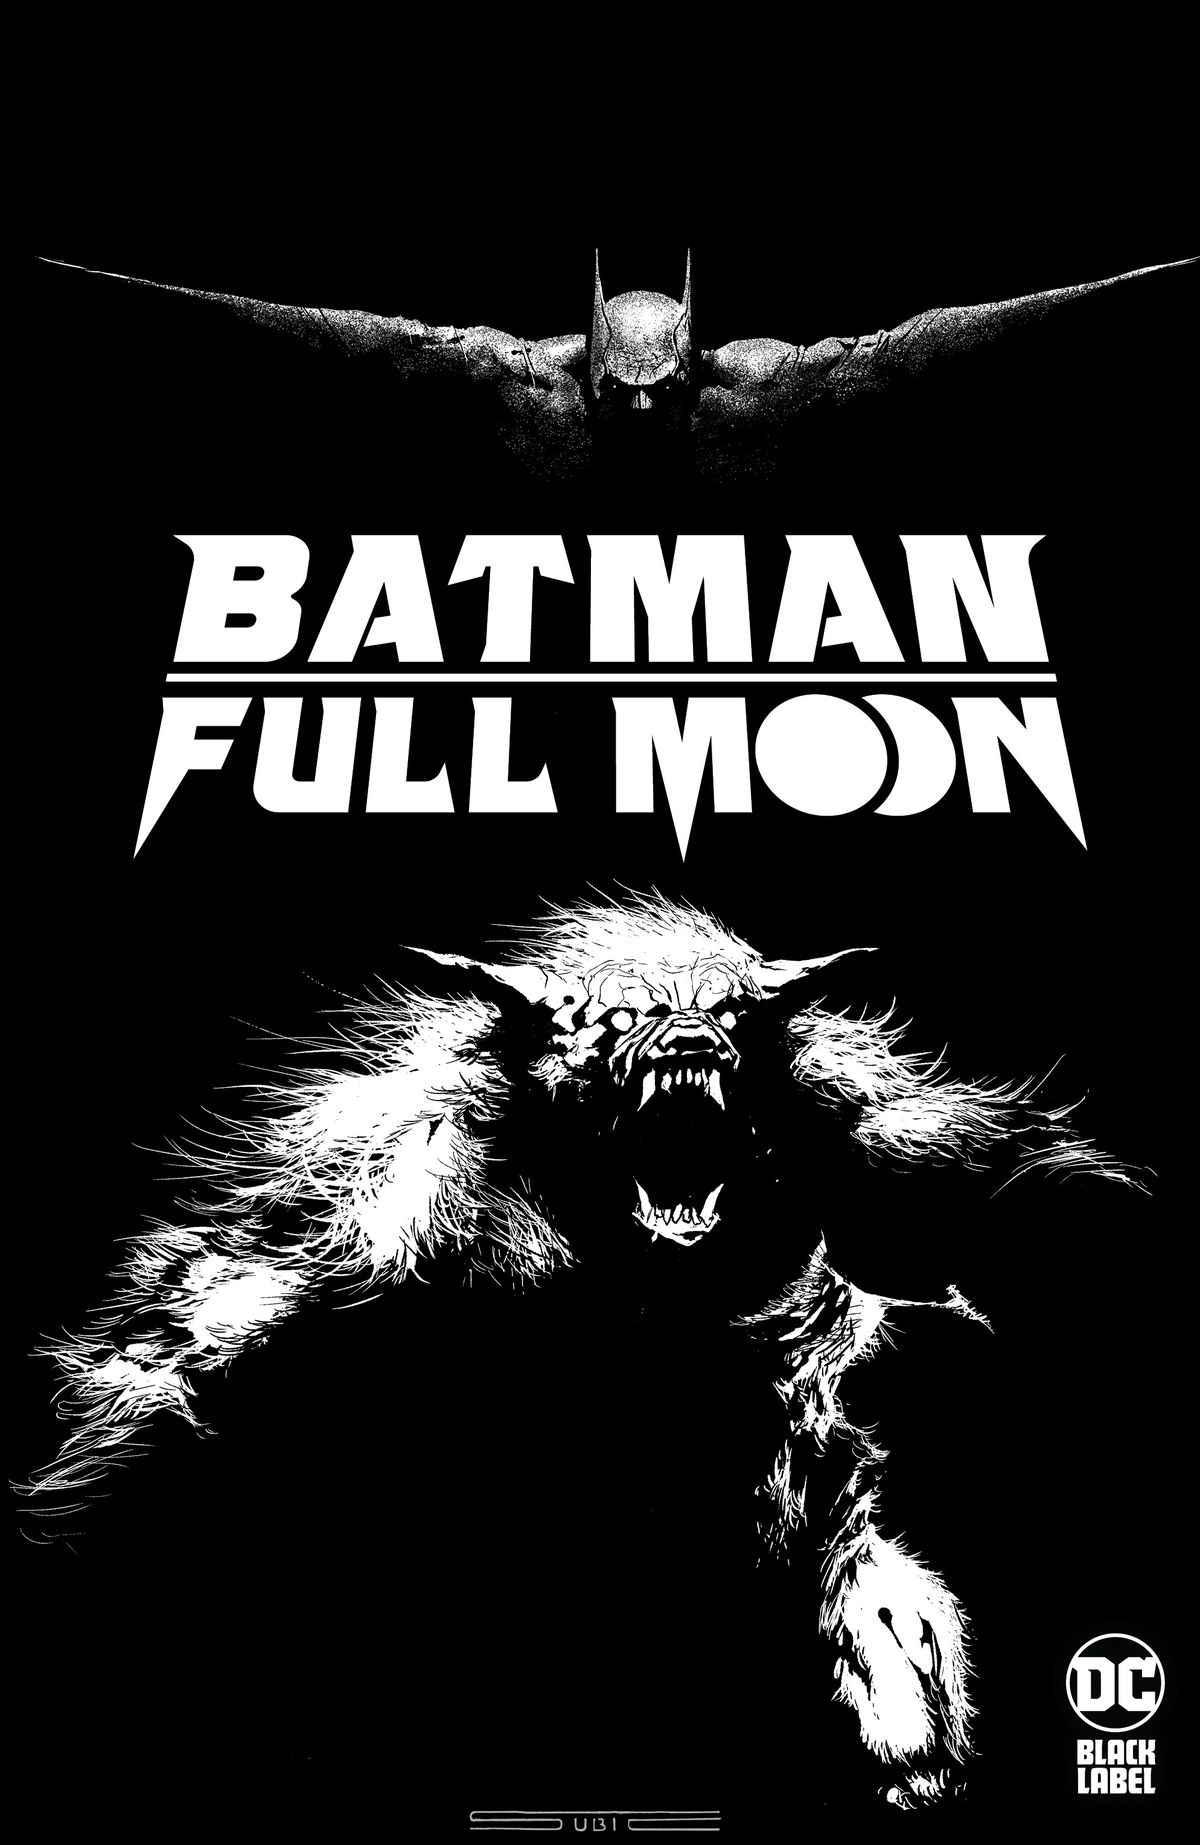 A werewolf growls as Batman lunges at him on the cover of Batman: Full Moon.